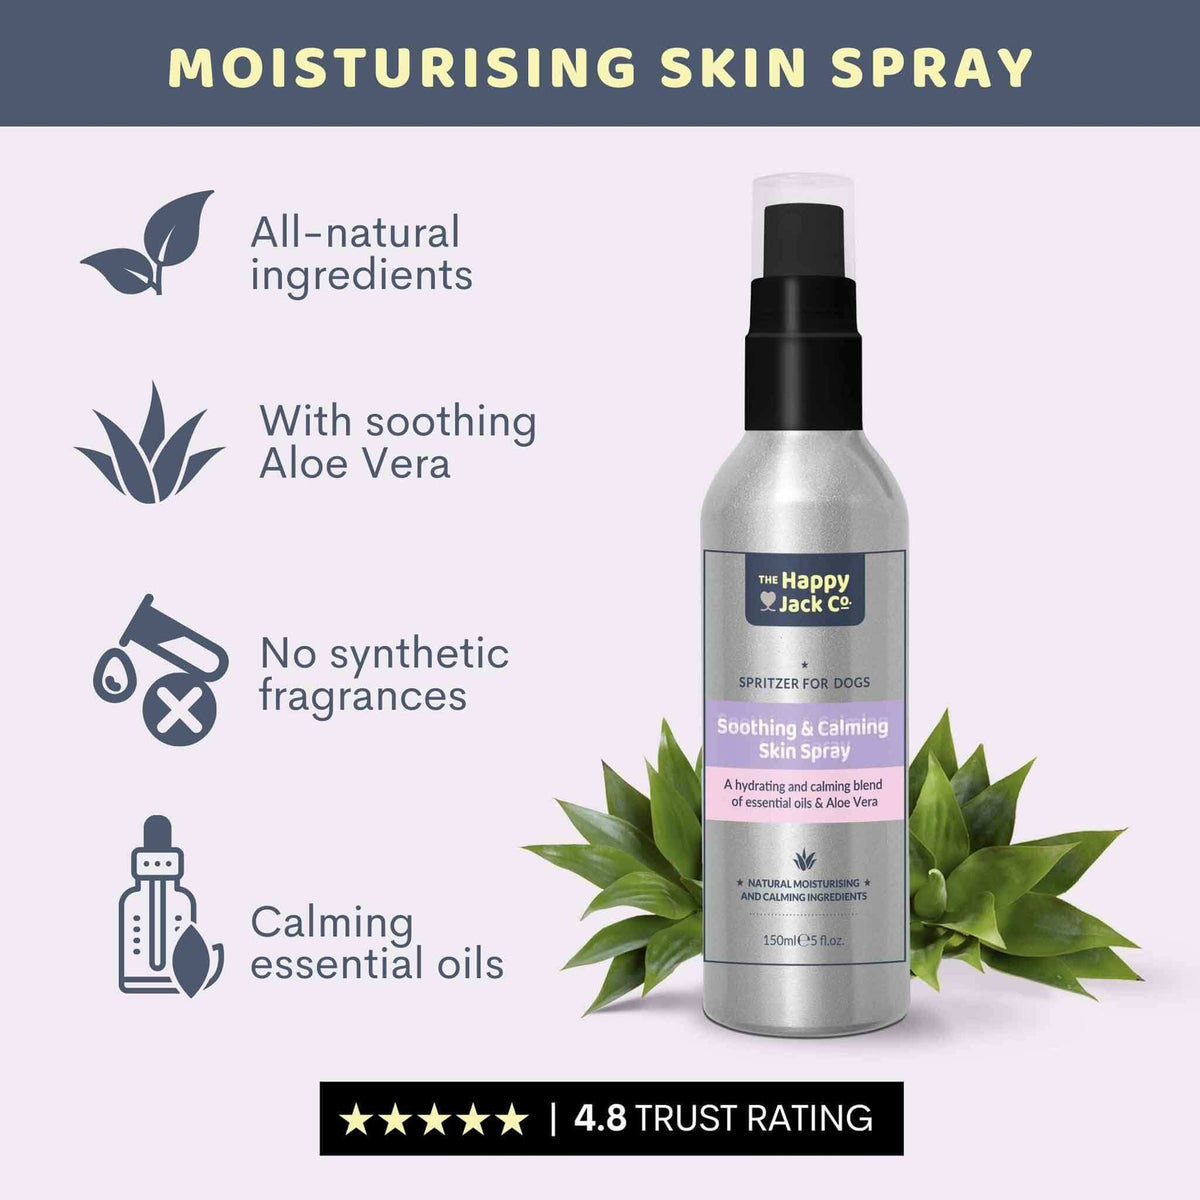 Ditch the Itch - Soothing Skin Spray - The Happy Jack Co